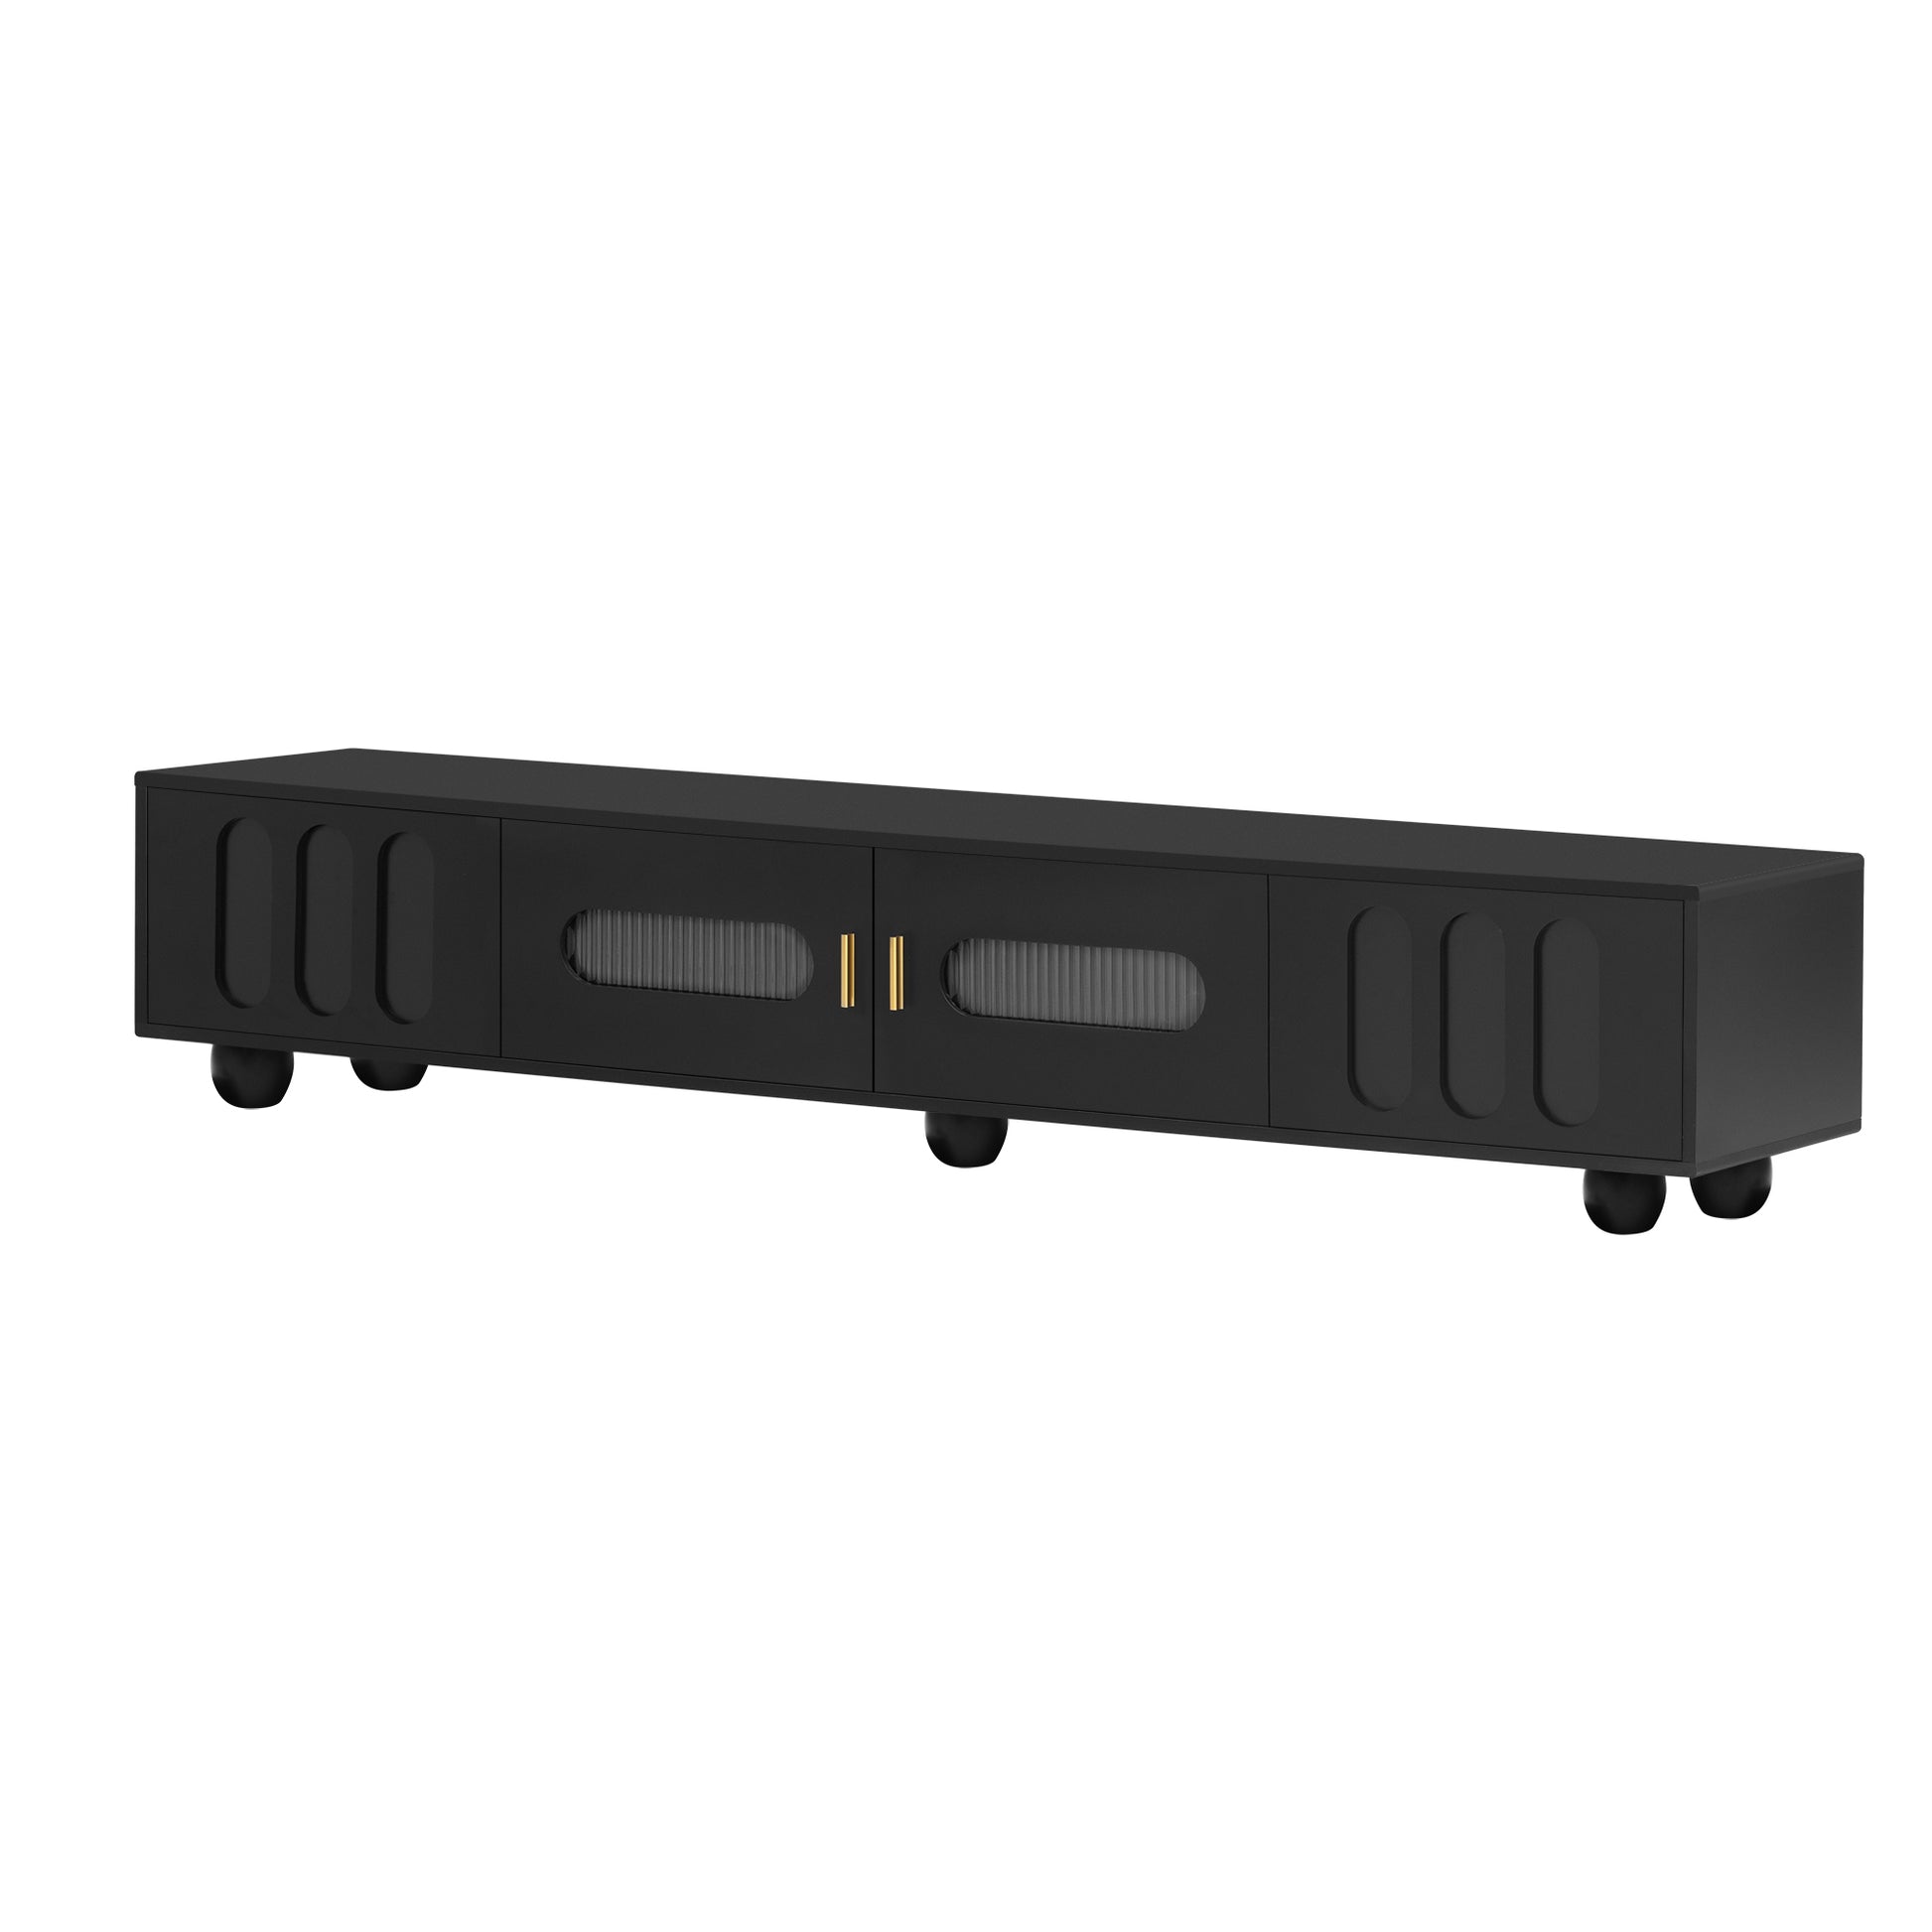 Modern Tv Stand For Tvs Up To 80 Inches,